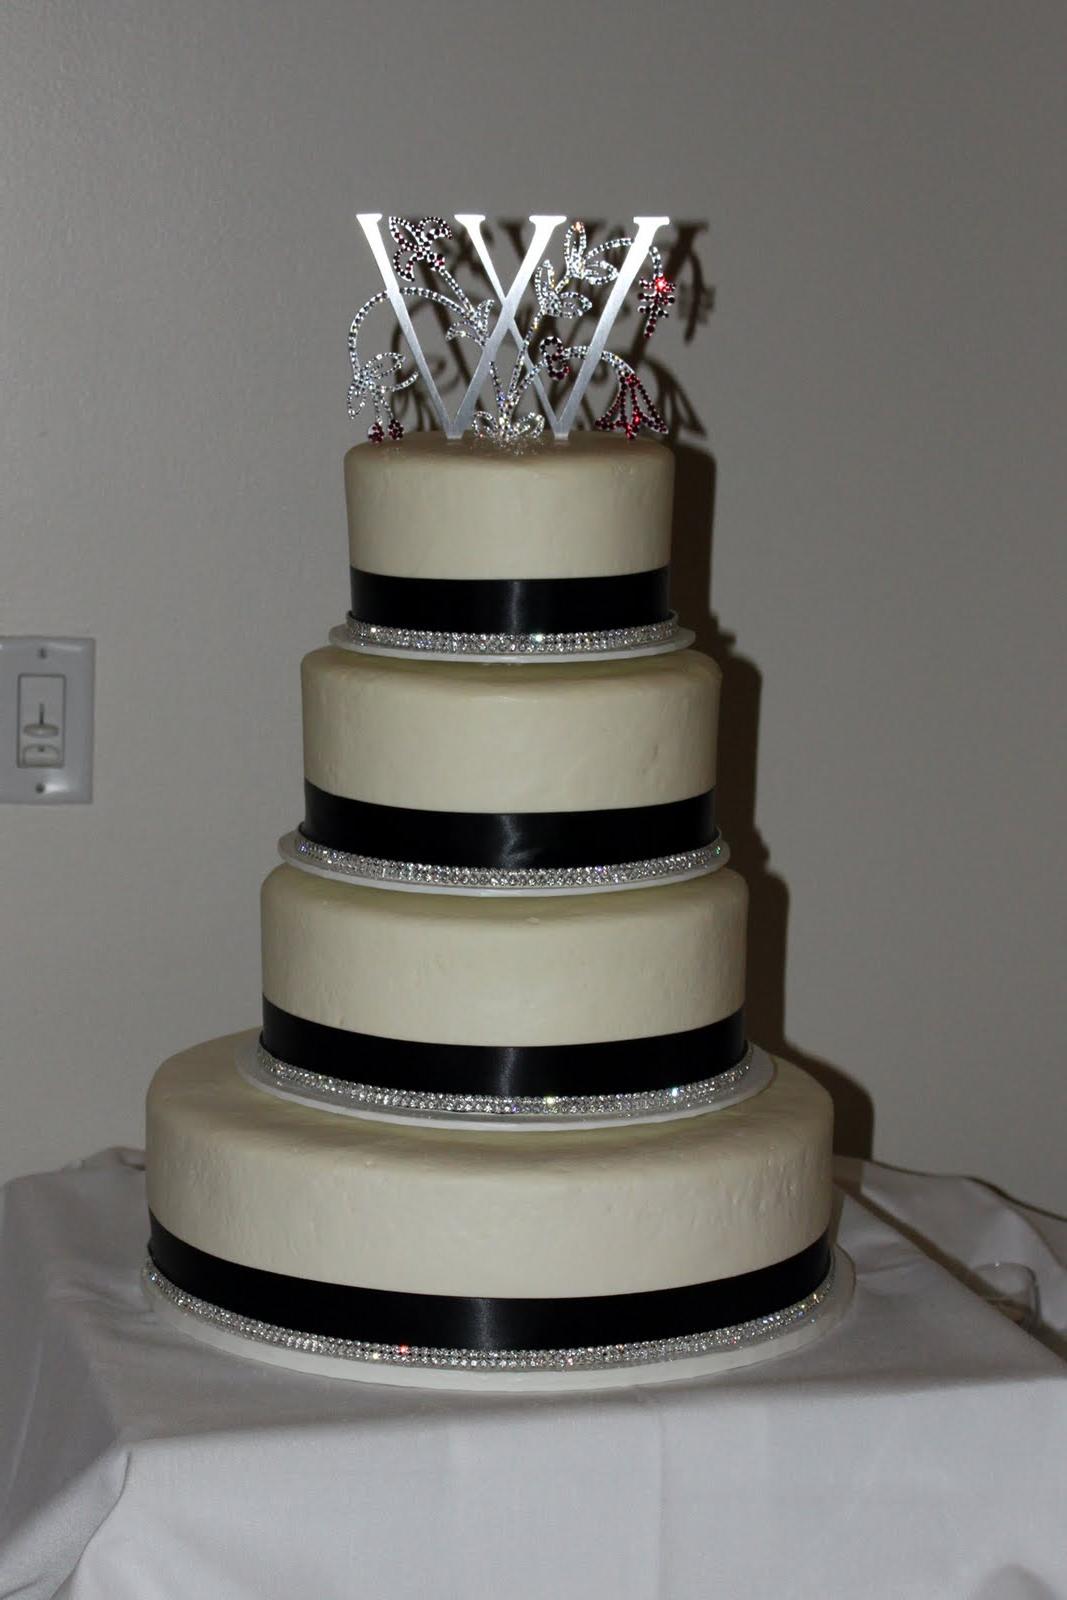 The cake had bling, people!